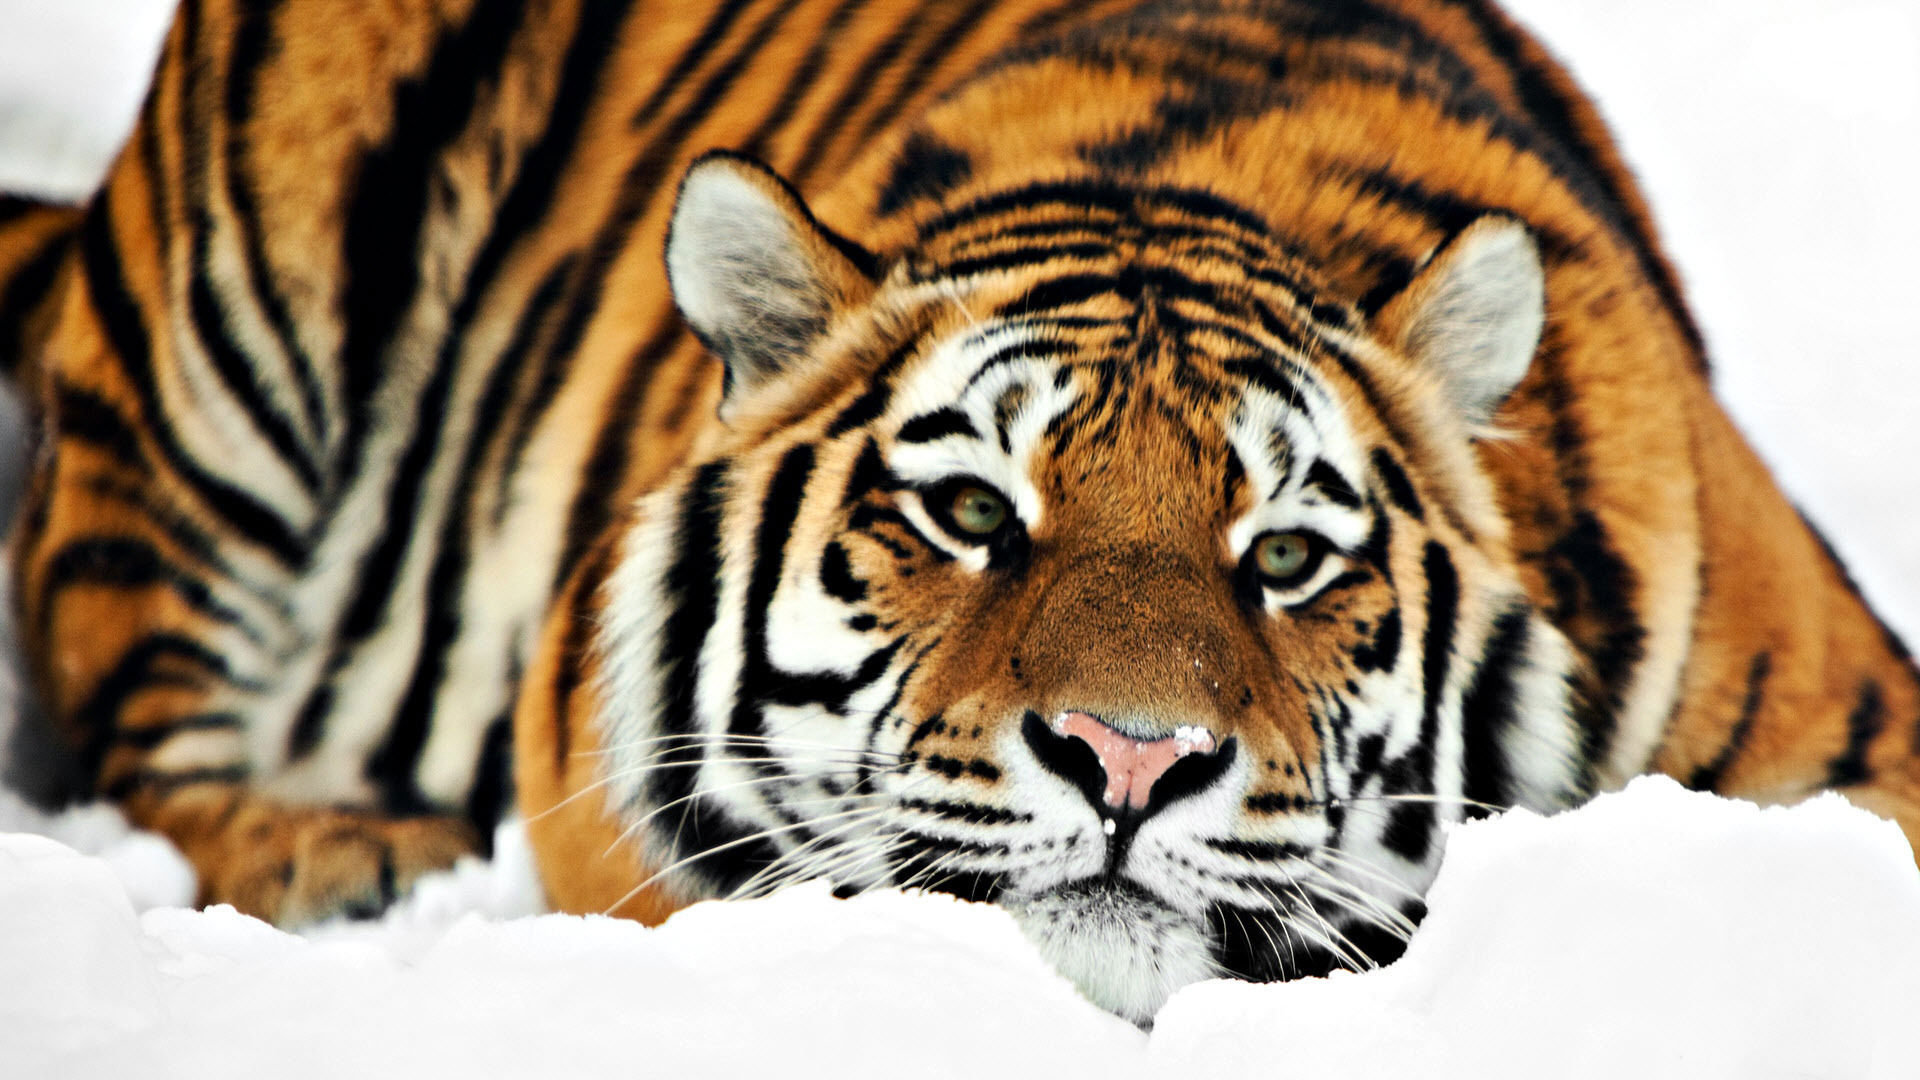 animals, Cats, Tigers, Winter, Snow, Seasons, Stripes, Color, Contrast, Orange, Pattern, Face, Eyes, Whiskers Wallpaper